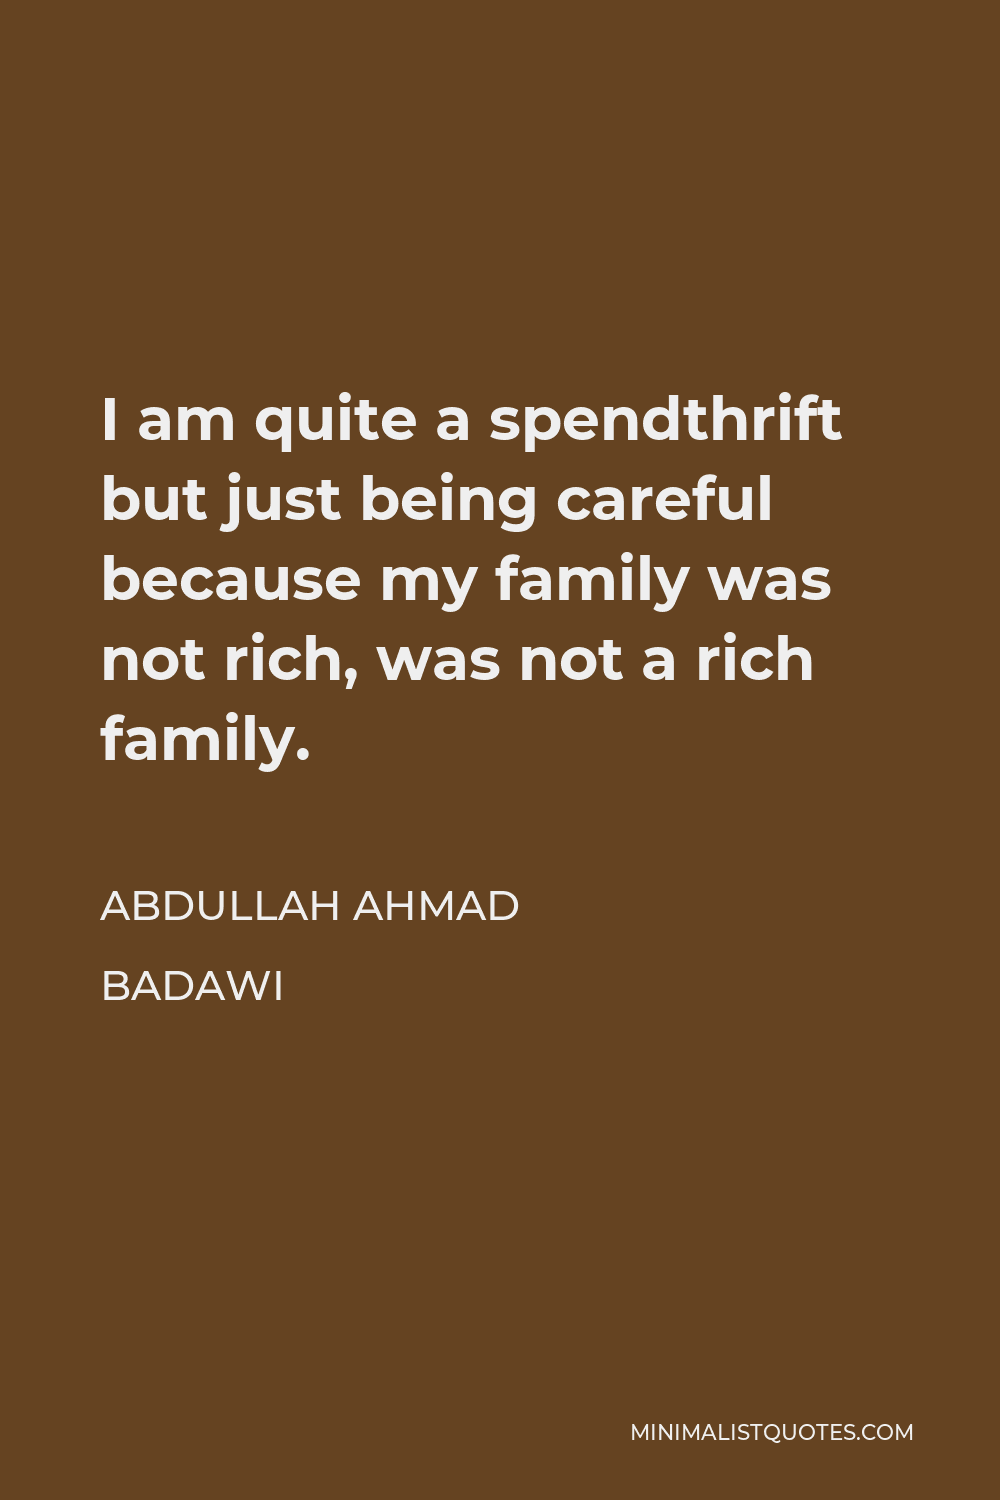 Abdullah Ahmad Badawi Quote - I am quite a spendthrift but just being careful because my family was not rich, was not a rich family.